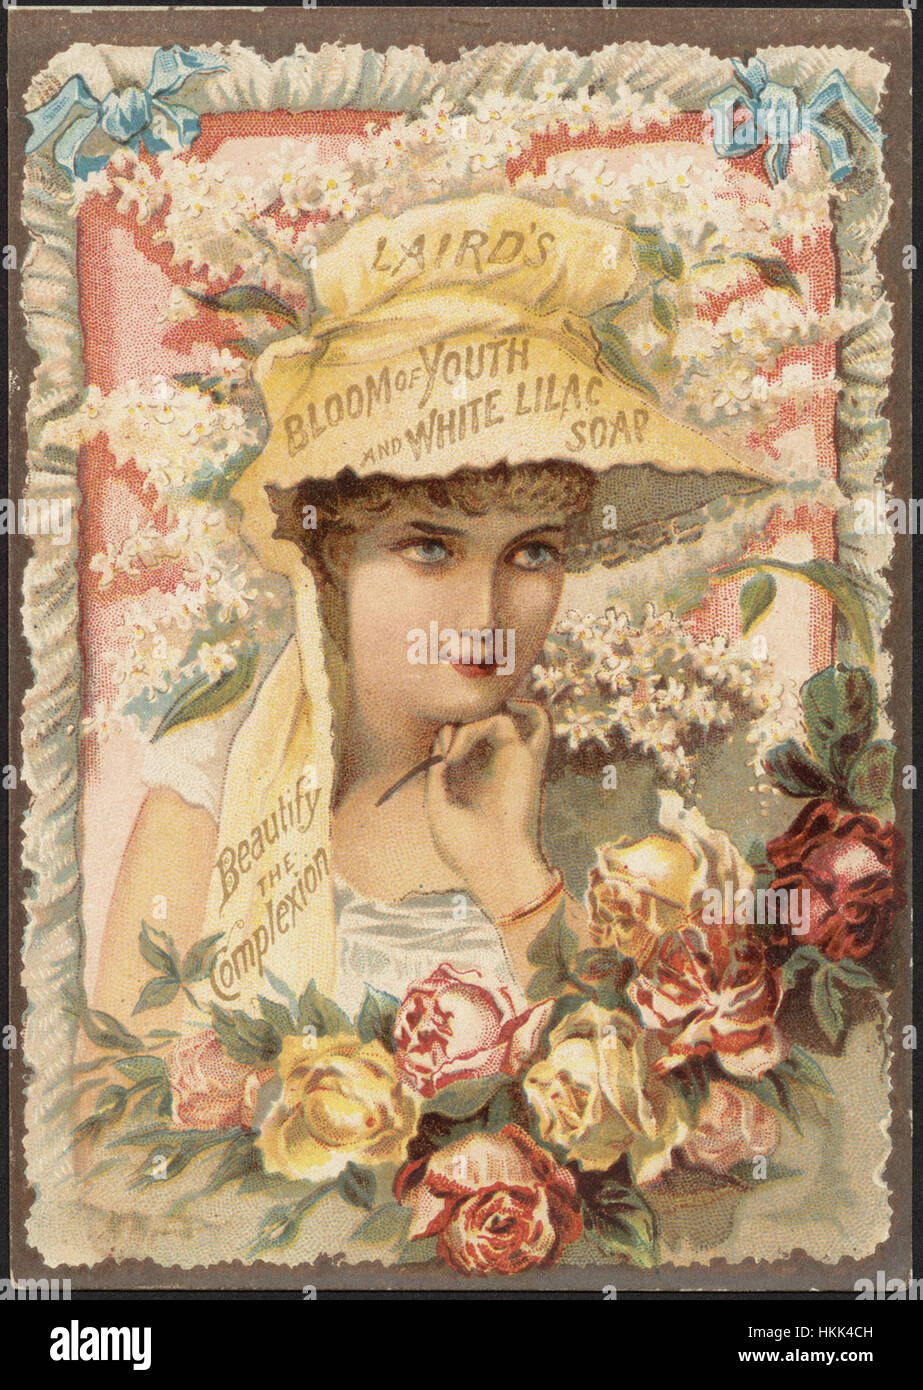 Laird's bloom of youth and white lilac soap. Beautify the complexion. Stock Photo